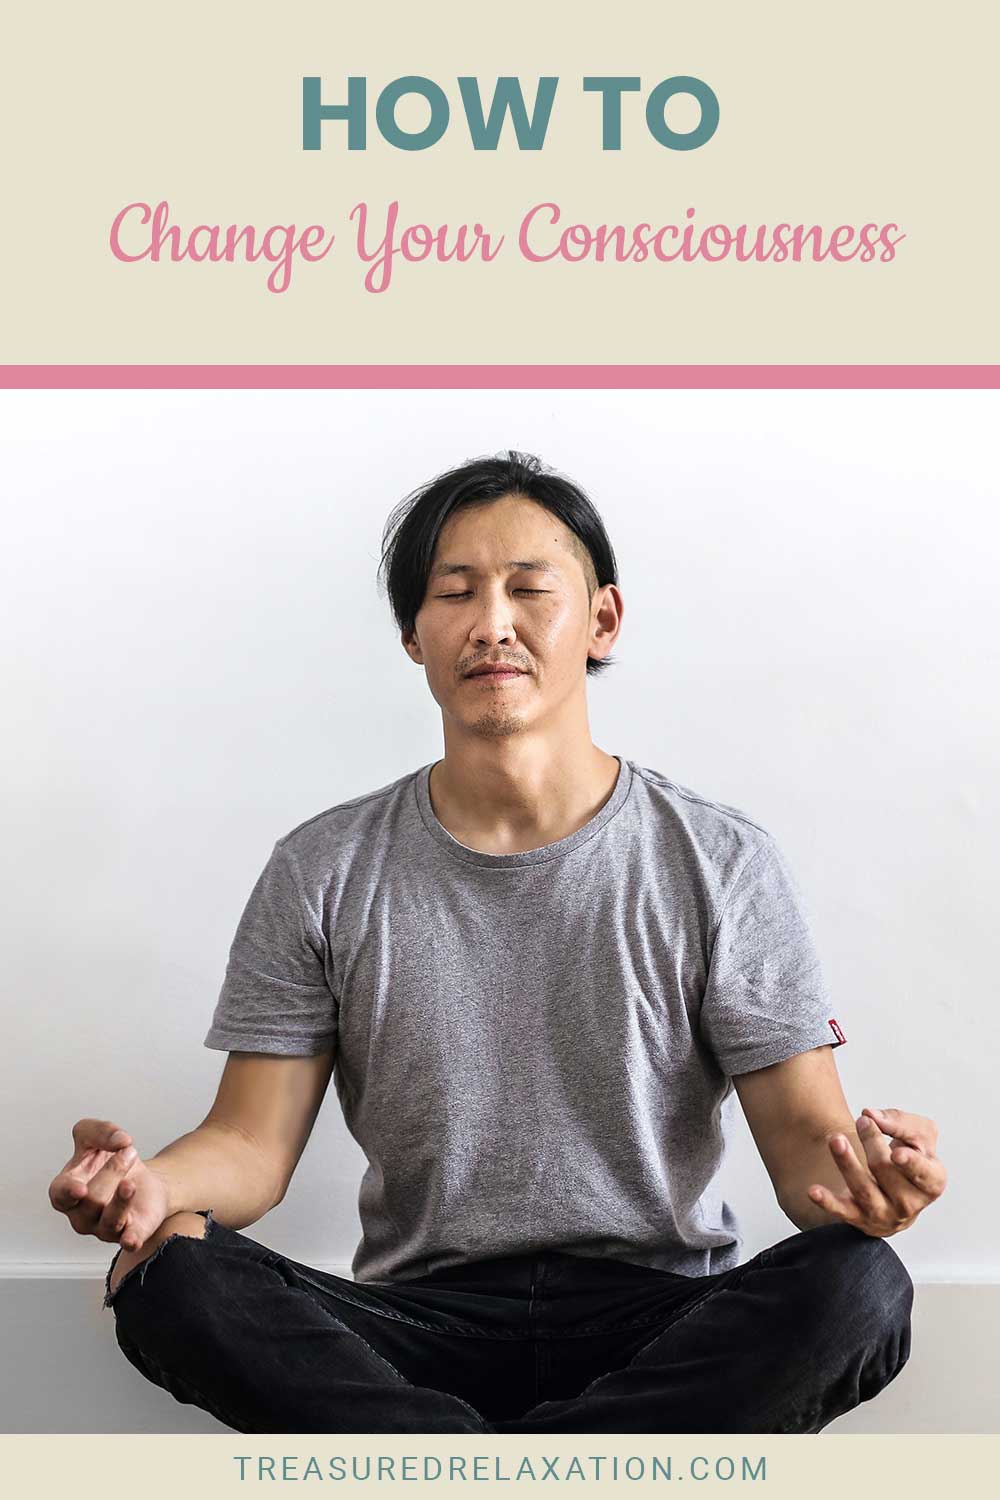 Man wearing grey t-shirt meditating - How To Change Your Consciousness?